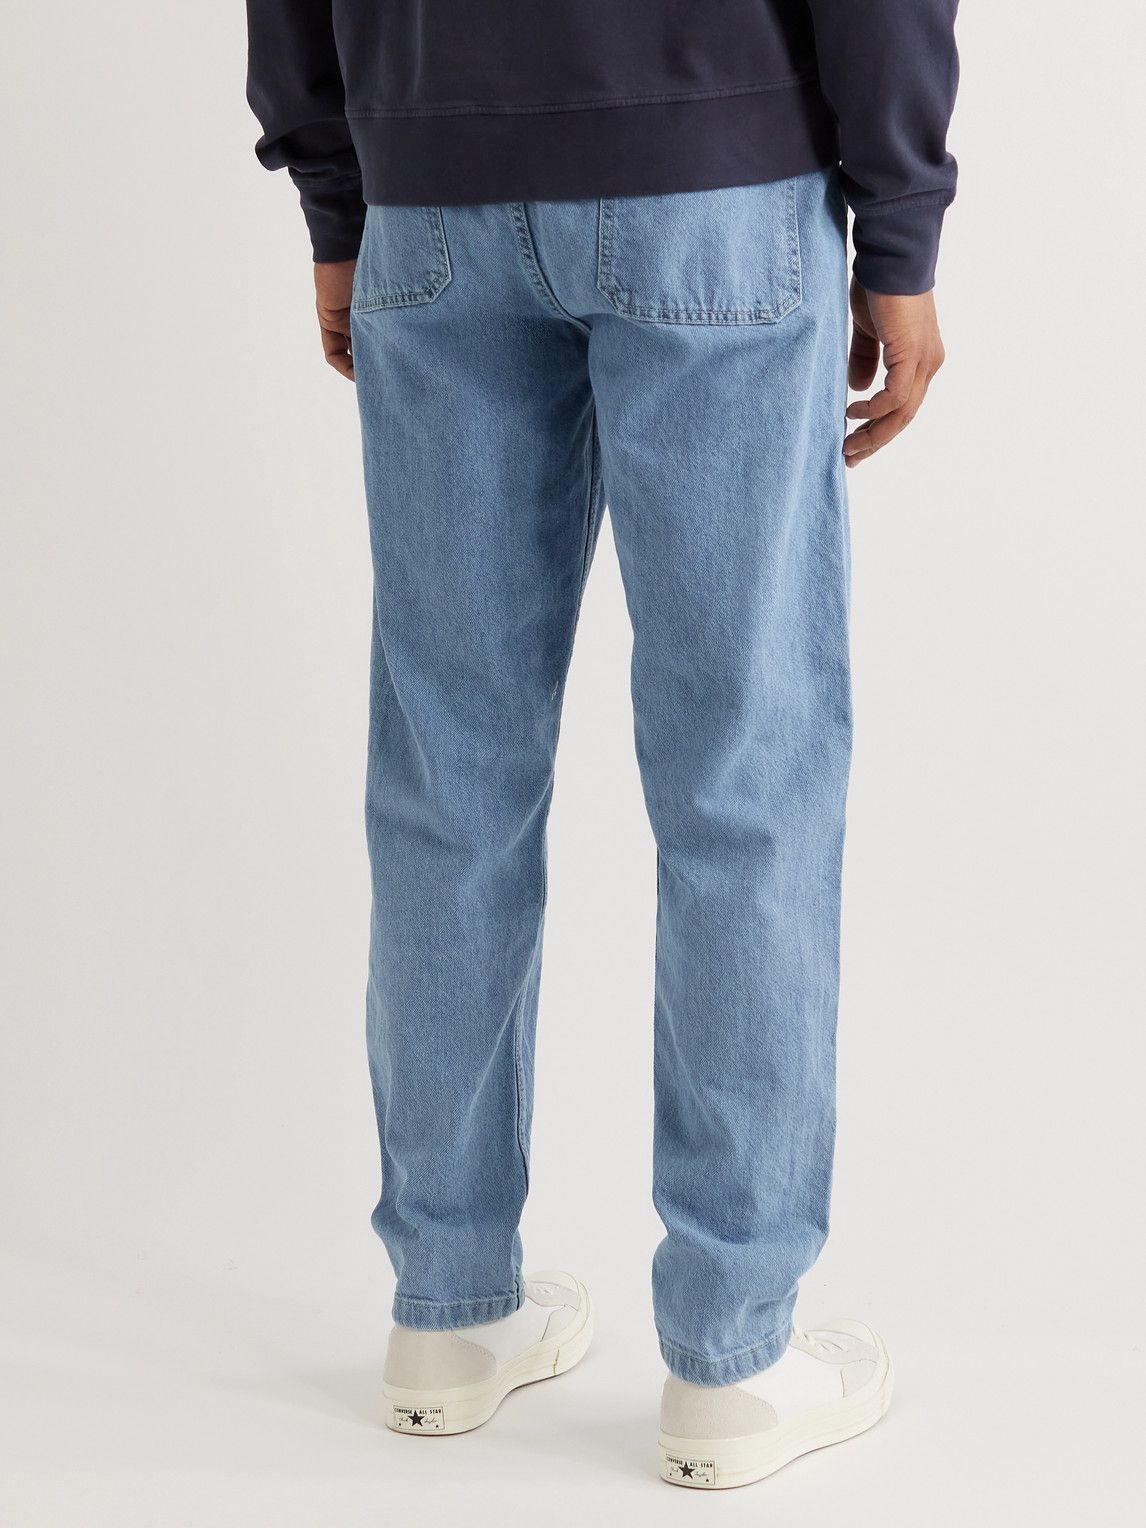 Armor Lux - Tapered Jeans - Blue Armor Lux